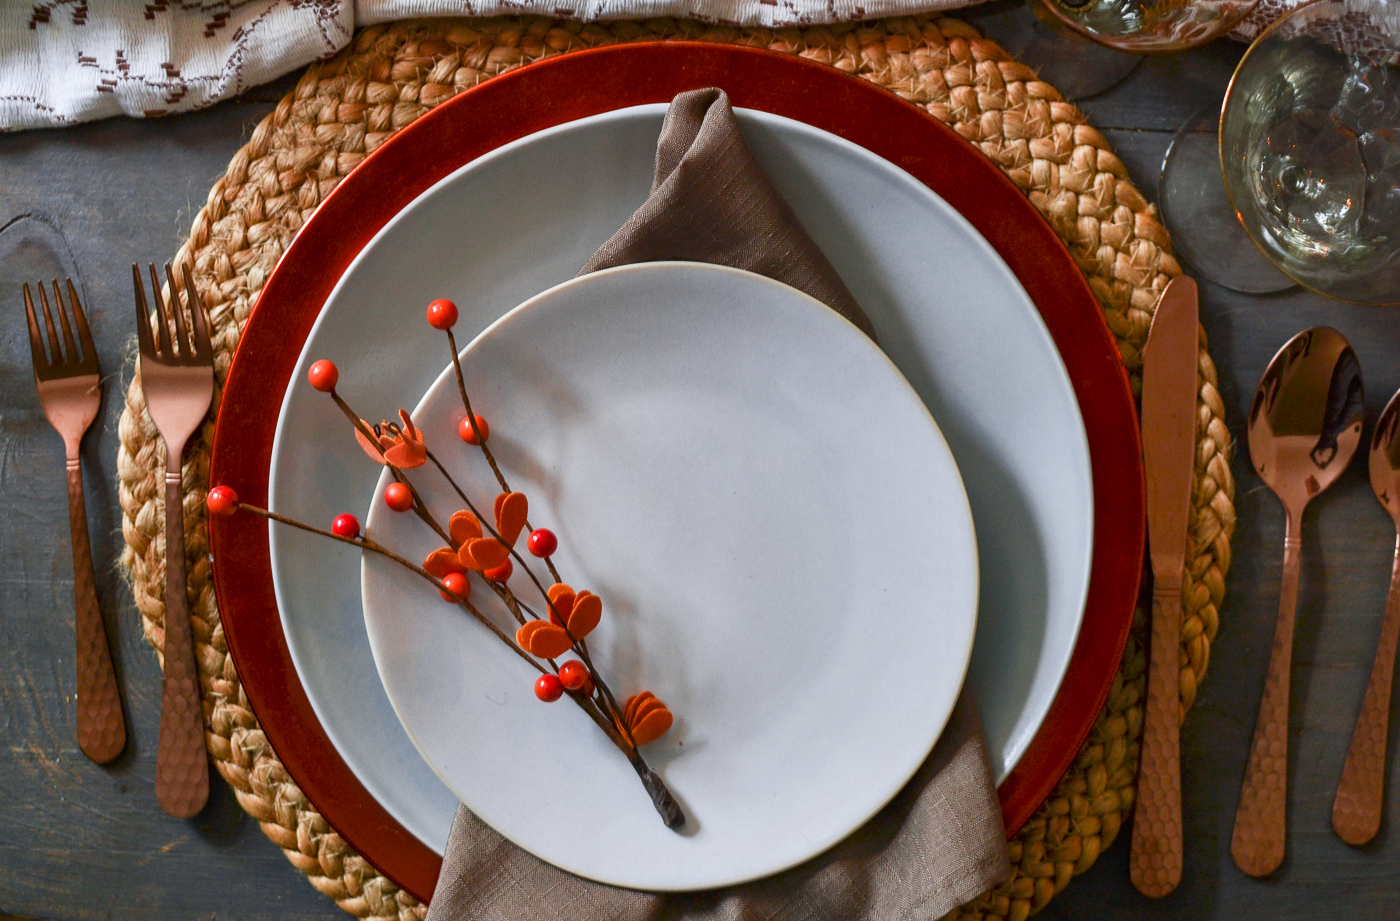 Autumn dinner table with soft blue and grey plates on top of an orange charger and rattan placemat.